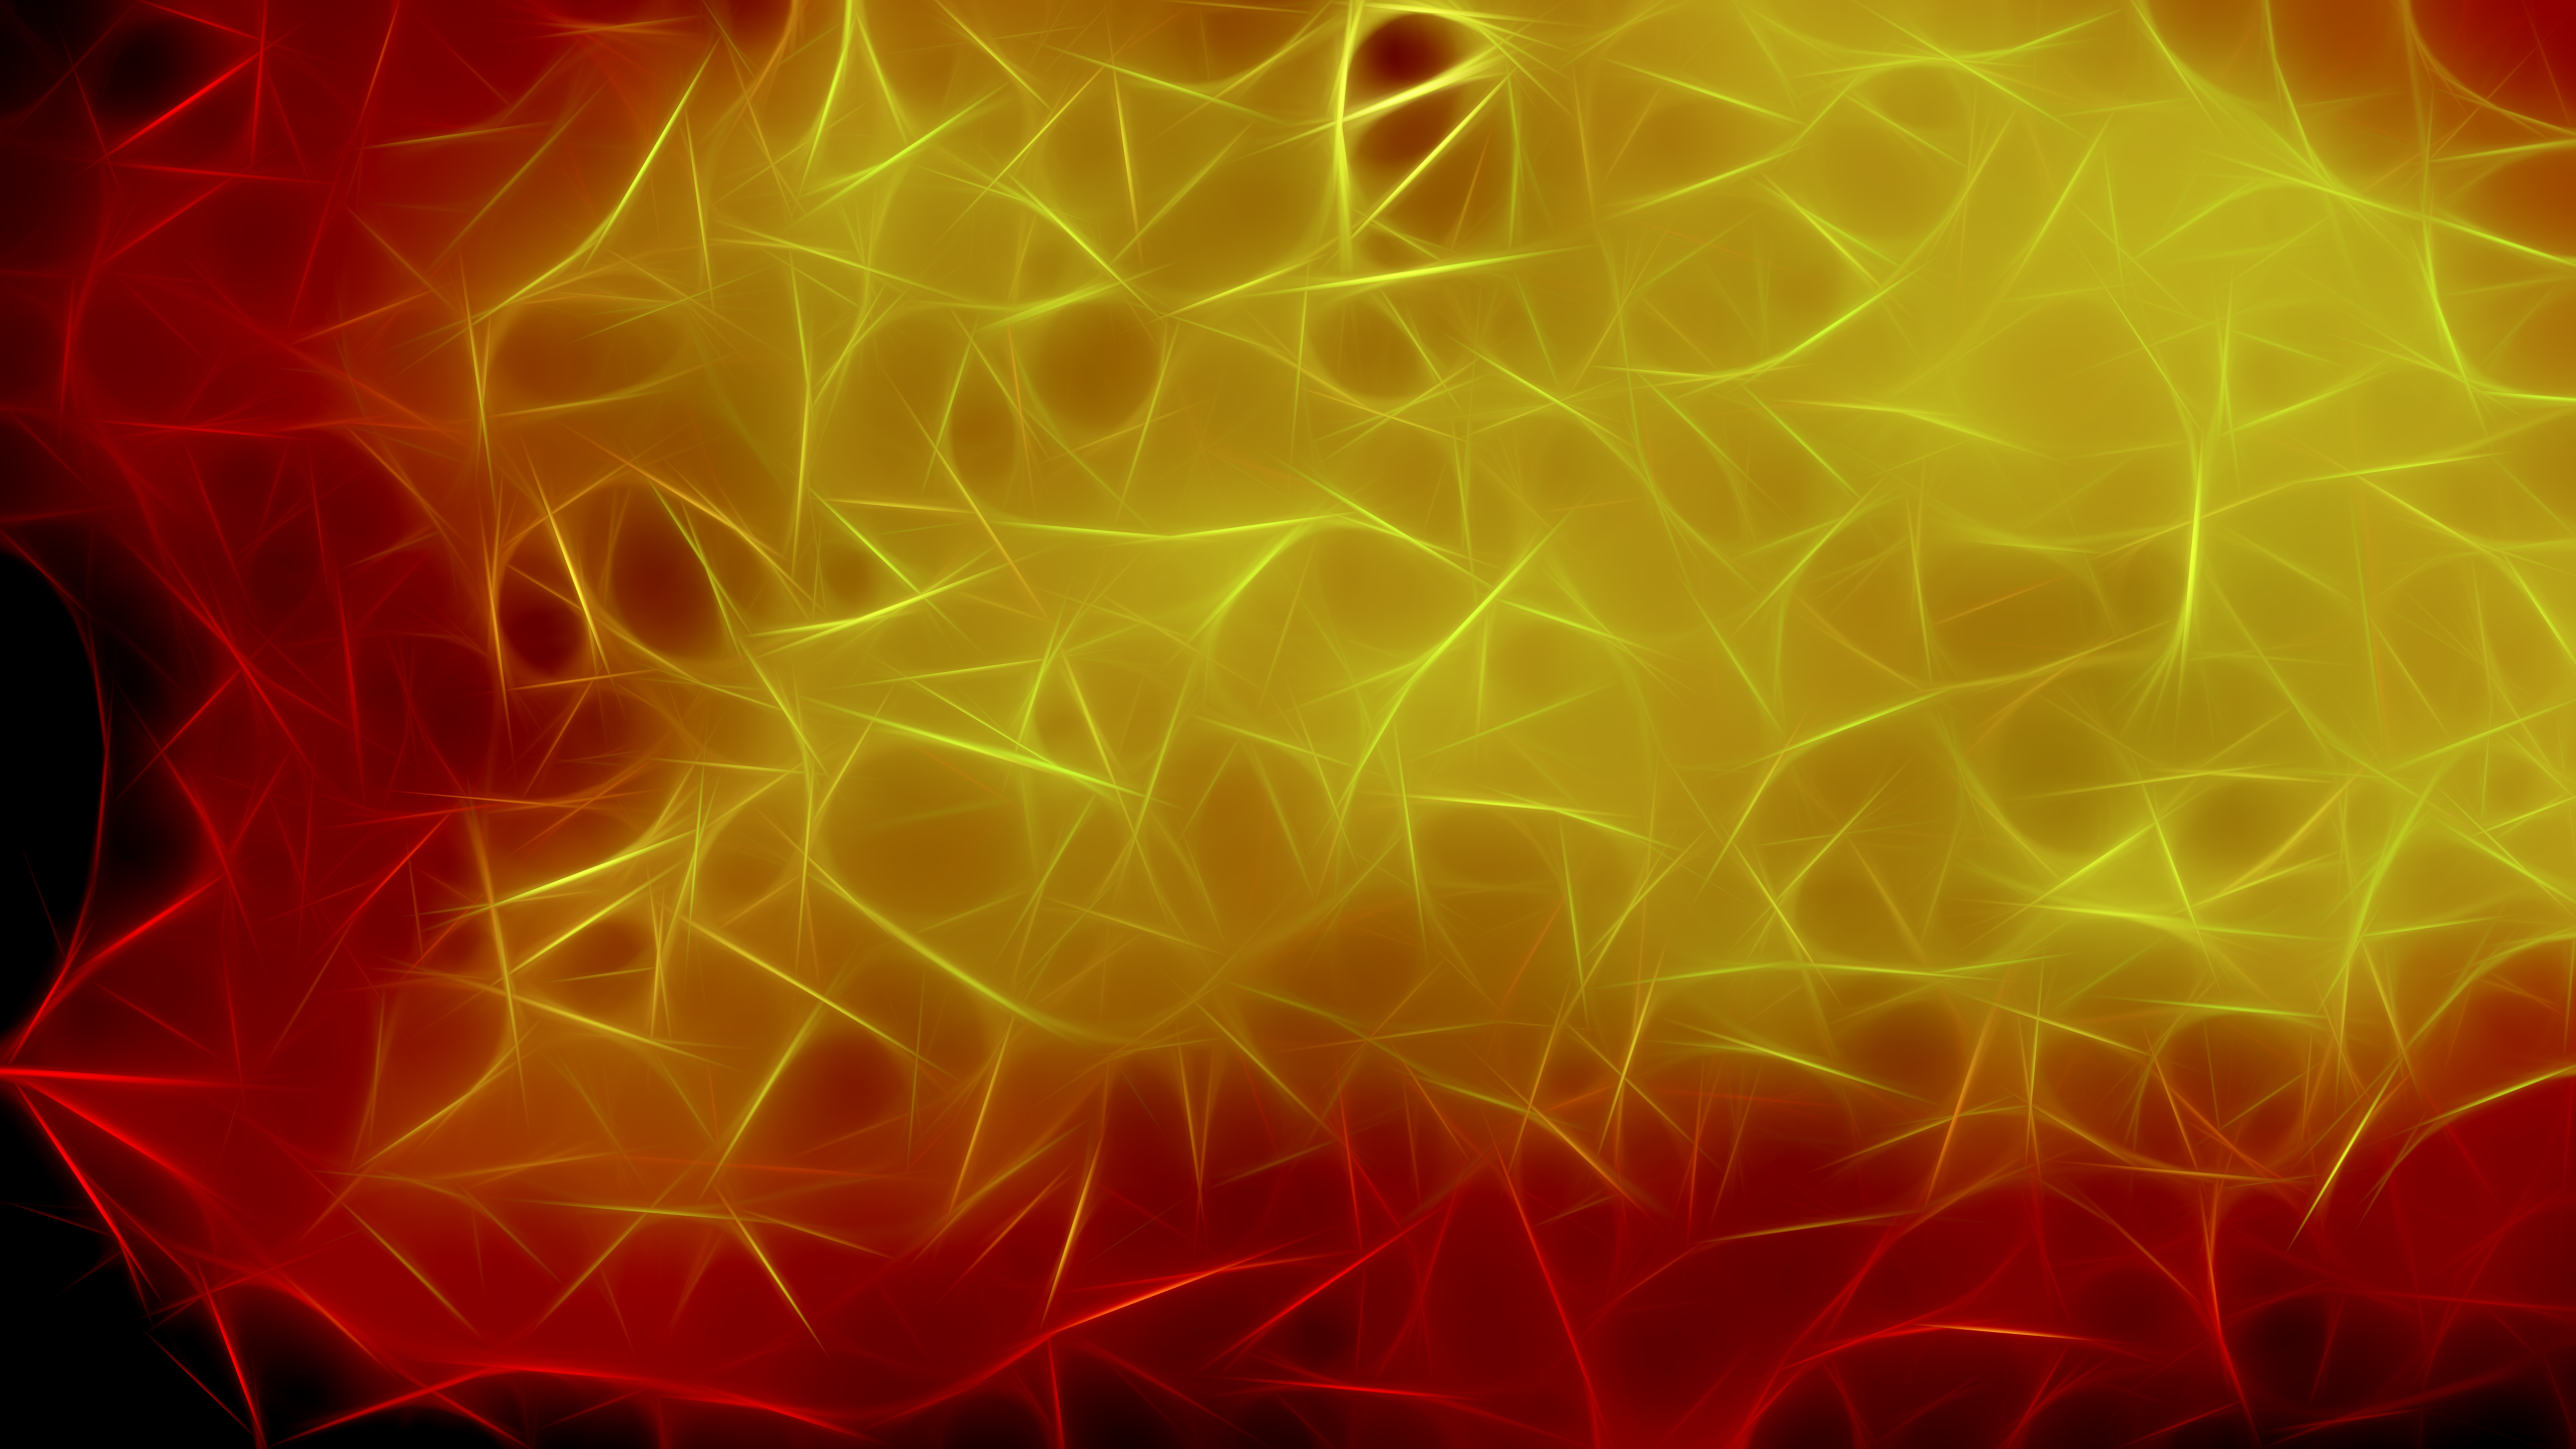 Free Abstract Black Red And Gold Fractal Wallpaper Image